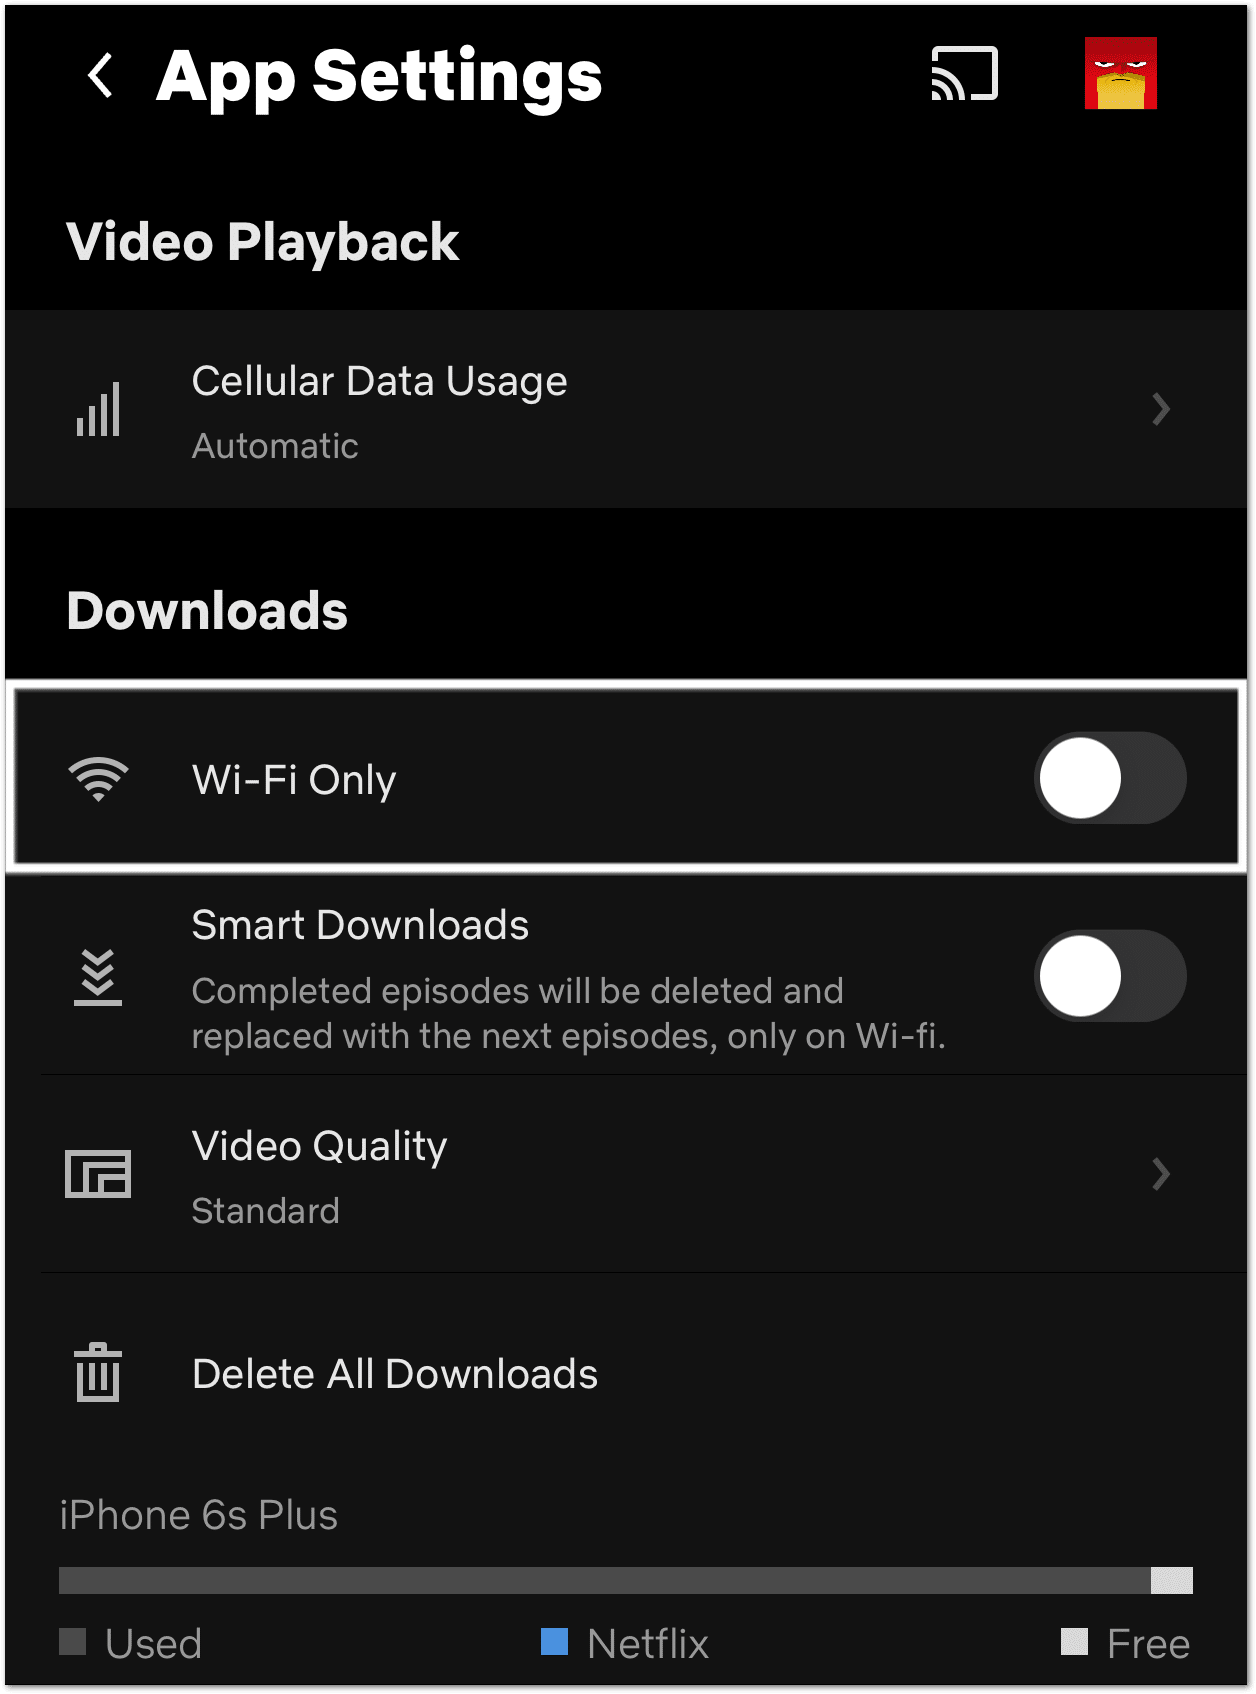 turn off wi-fi only download setting on Netflix to fix downloads not working or playing